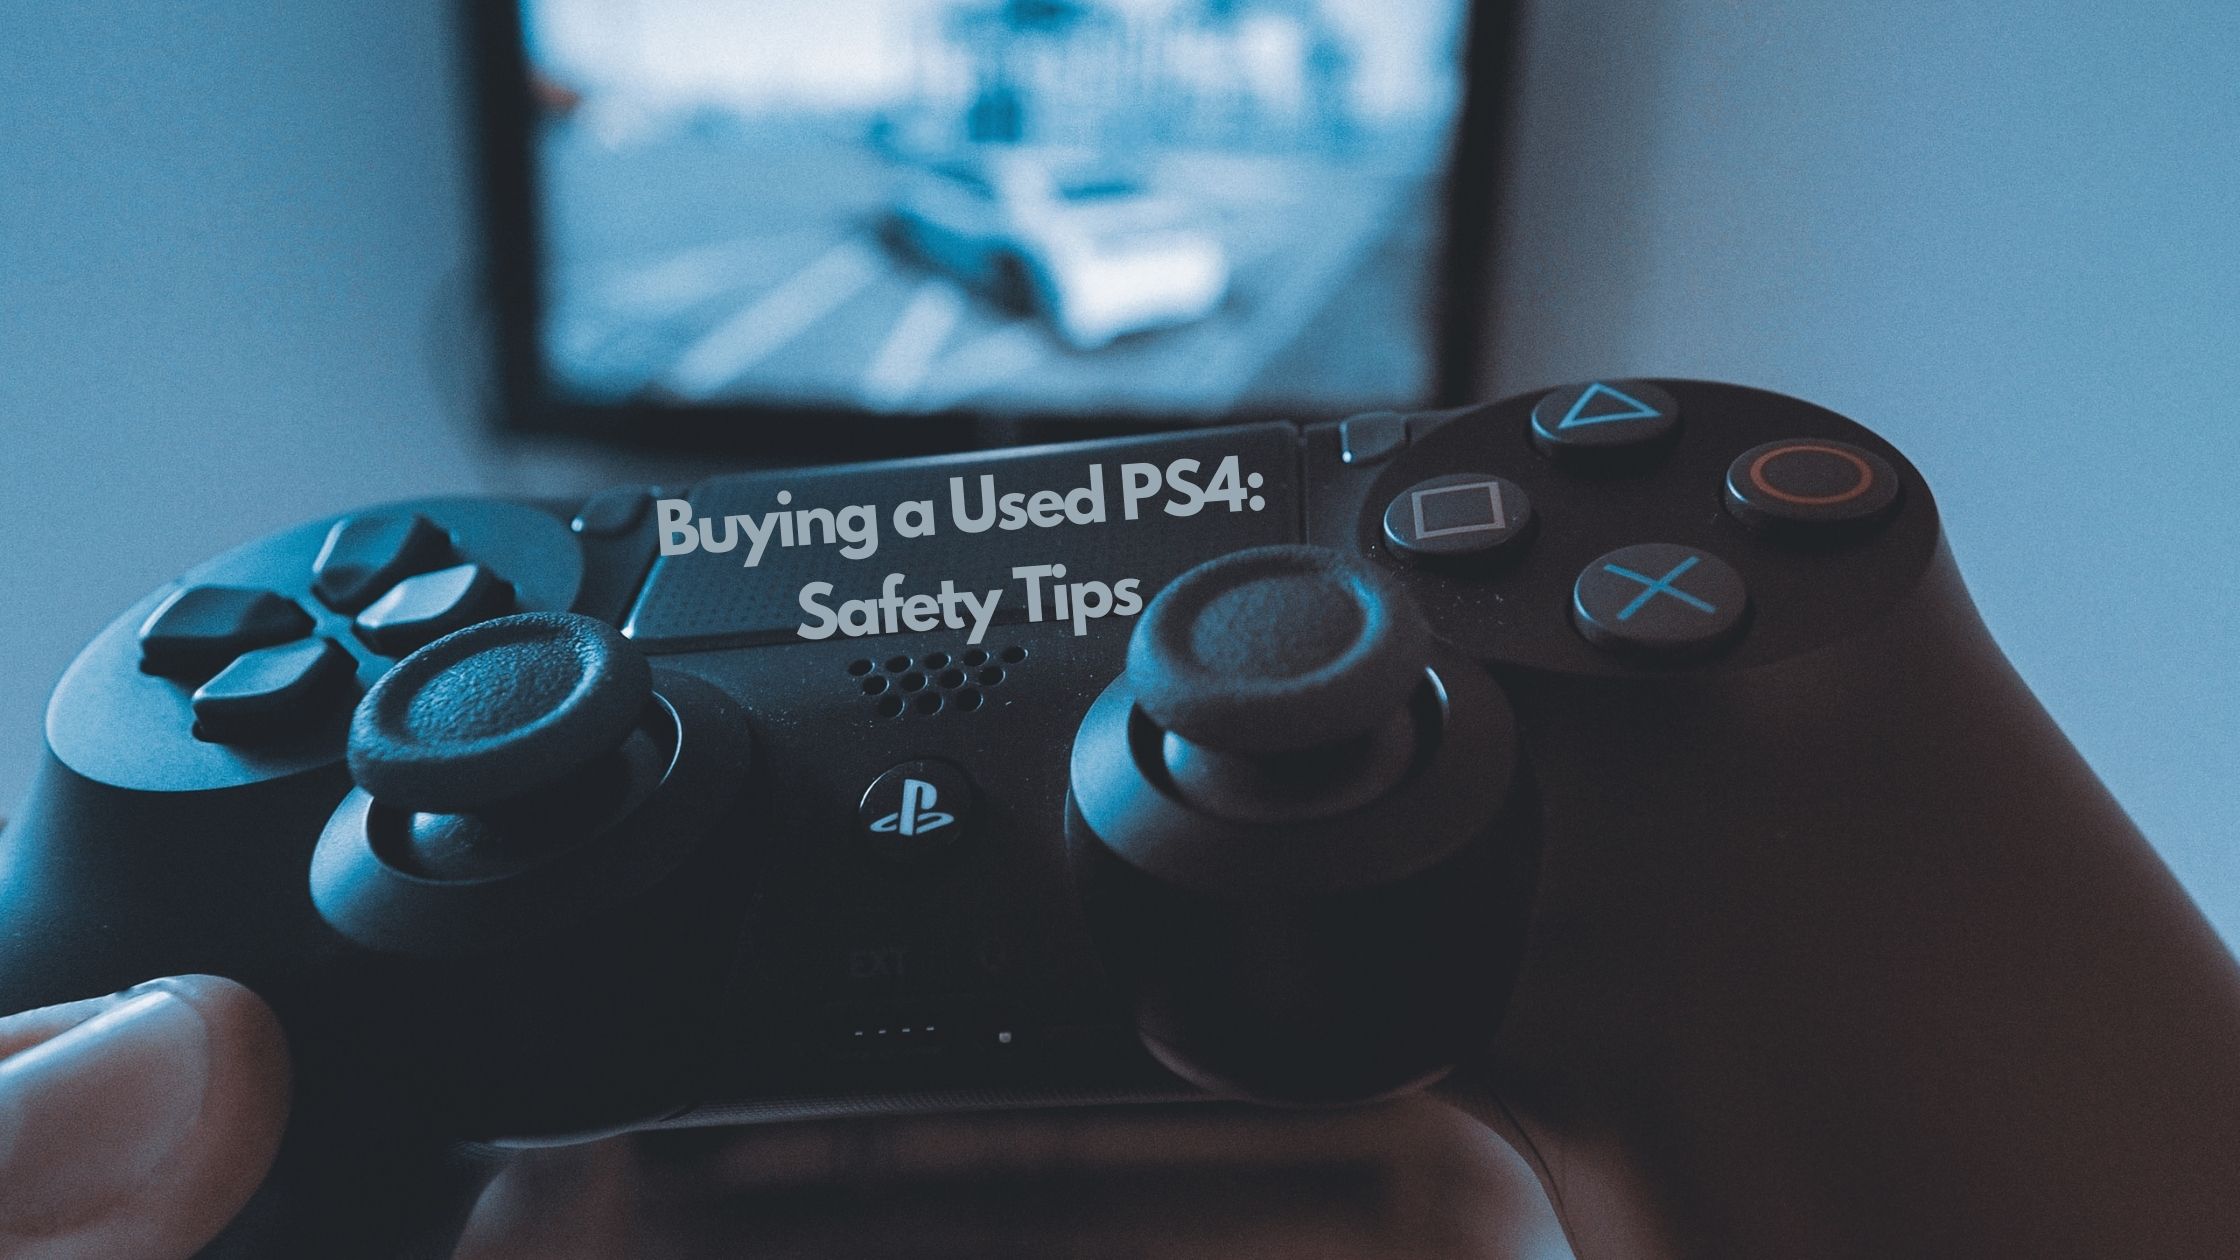 Buying a Used PS4 Safety Tips